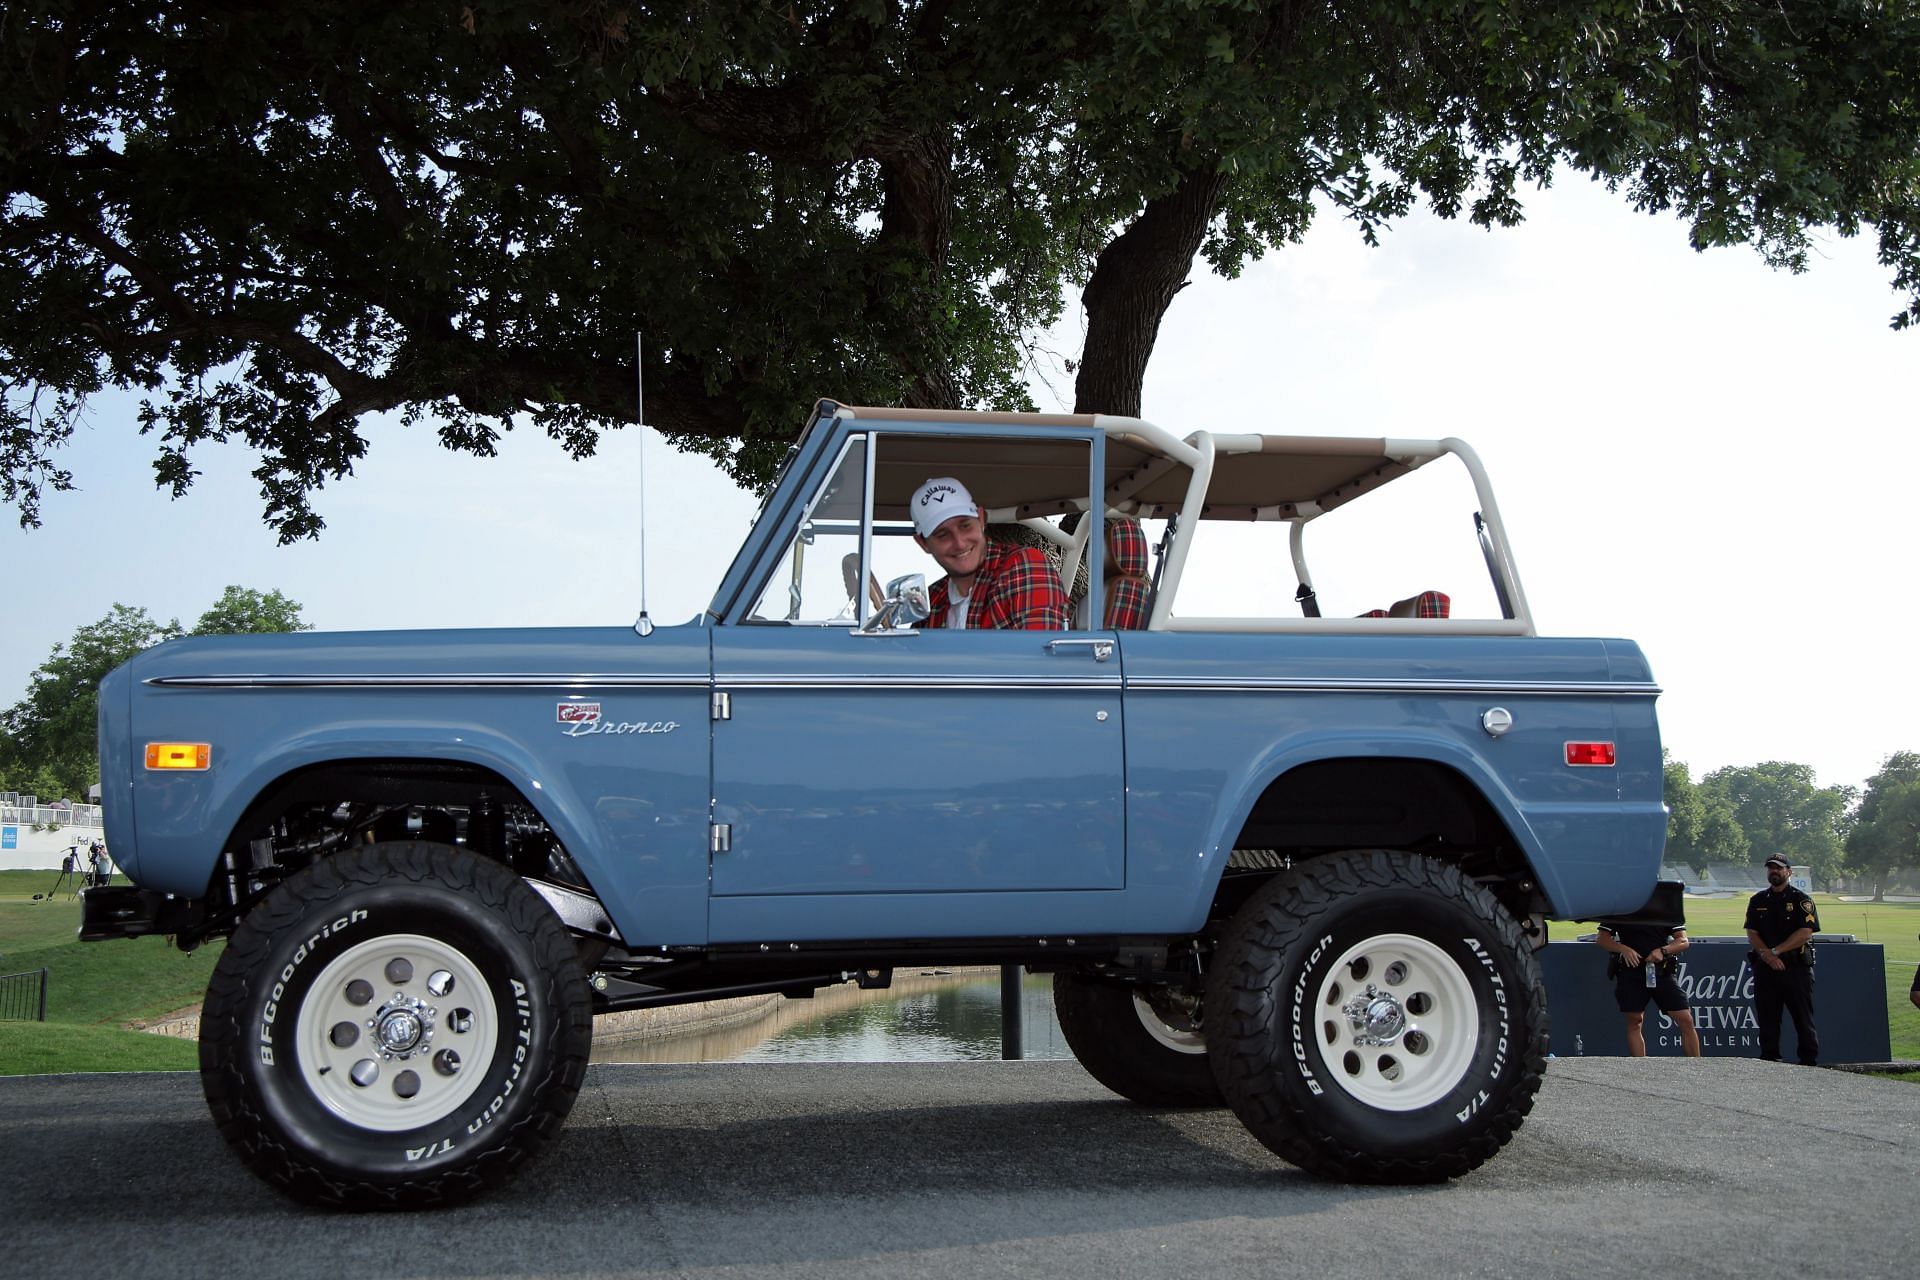 Emiliano Grillo poses in a Ford Bronco after winning the Charles Schwab Challenge 2023